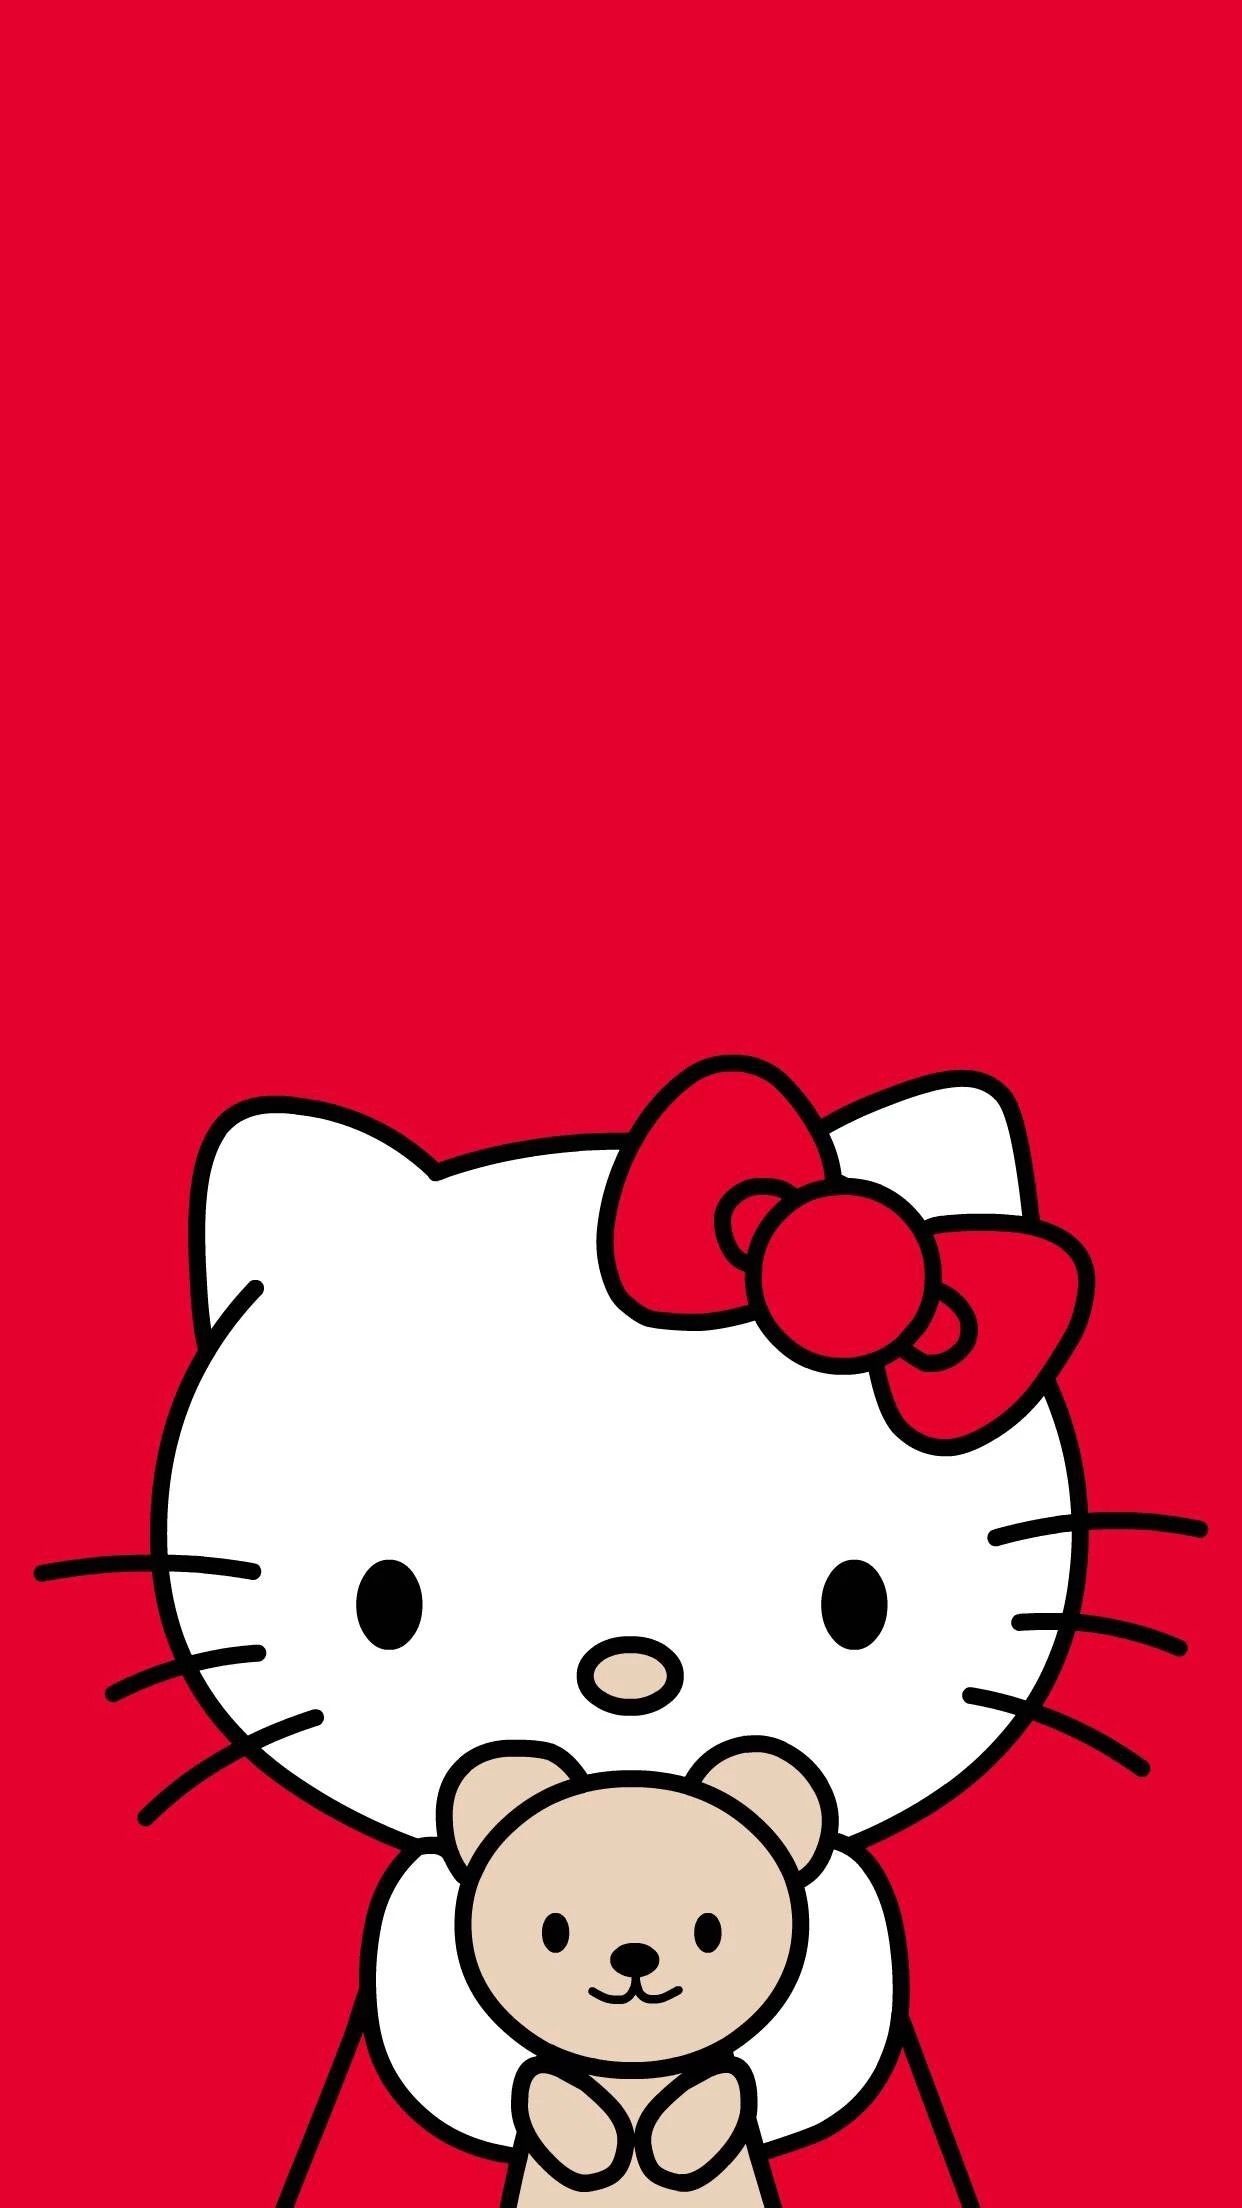 HD wallpaper hello kitty colorful figure large group of objects red   Wallpaper Flare